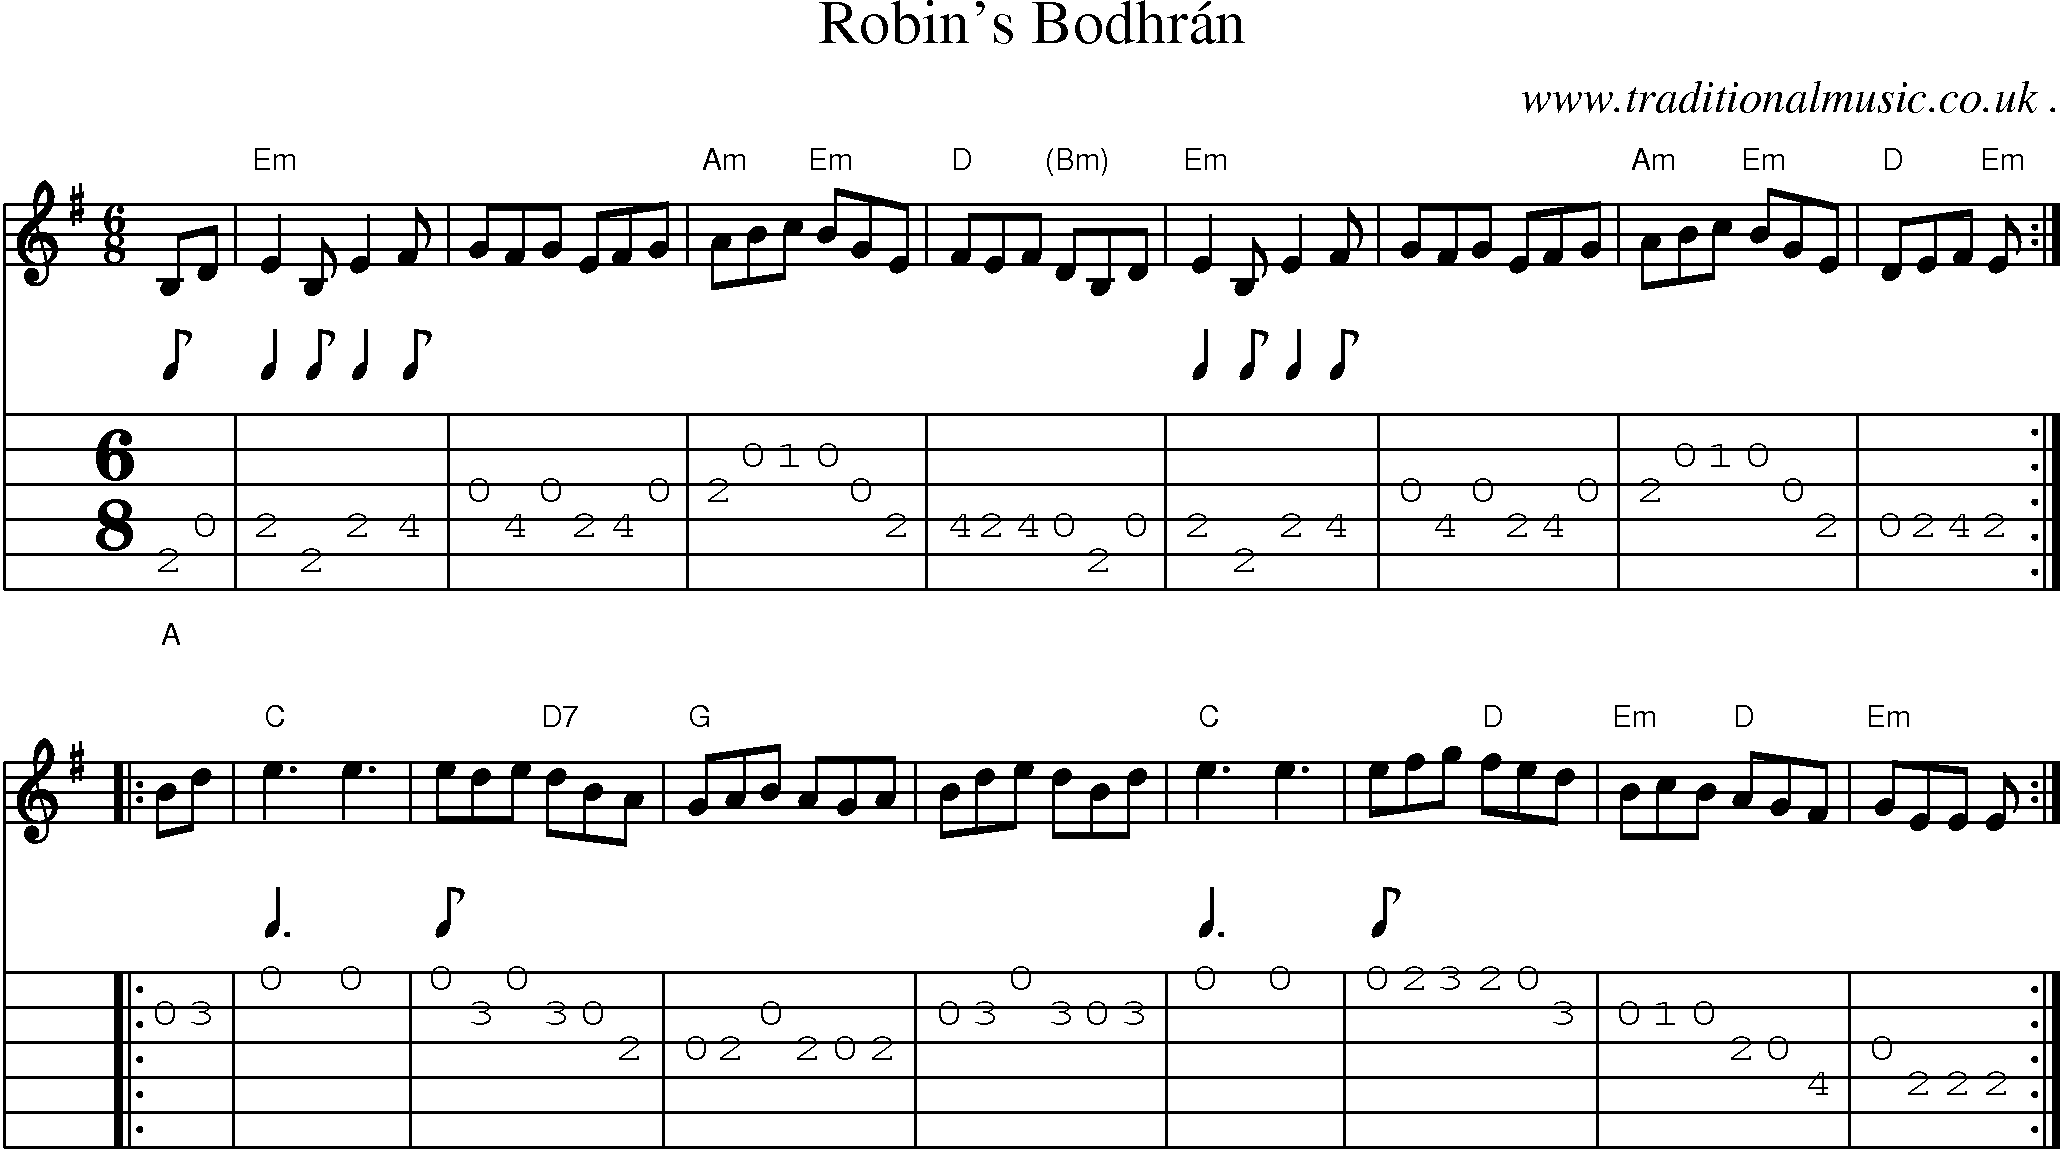 Sheet-music  score, Chords and Guitar Tabs for Robins Bodhran